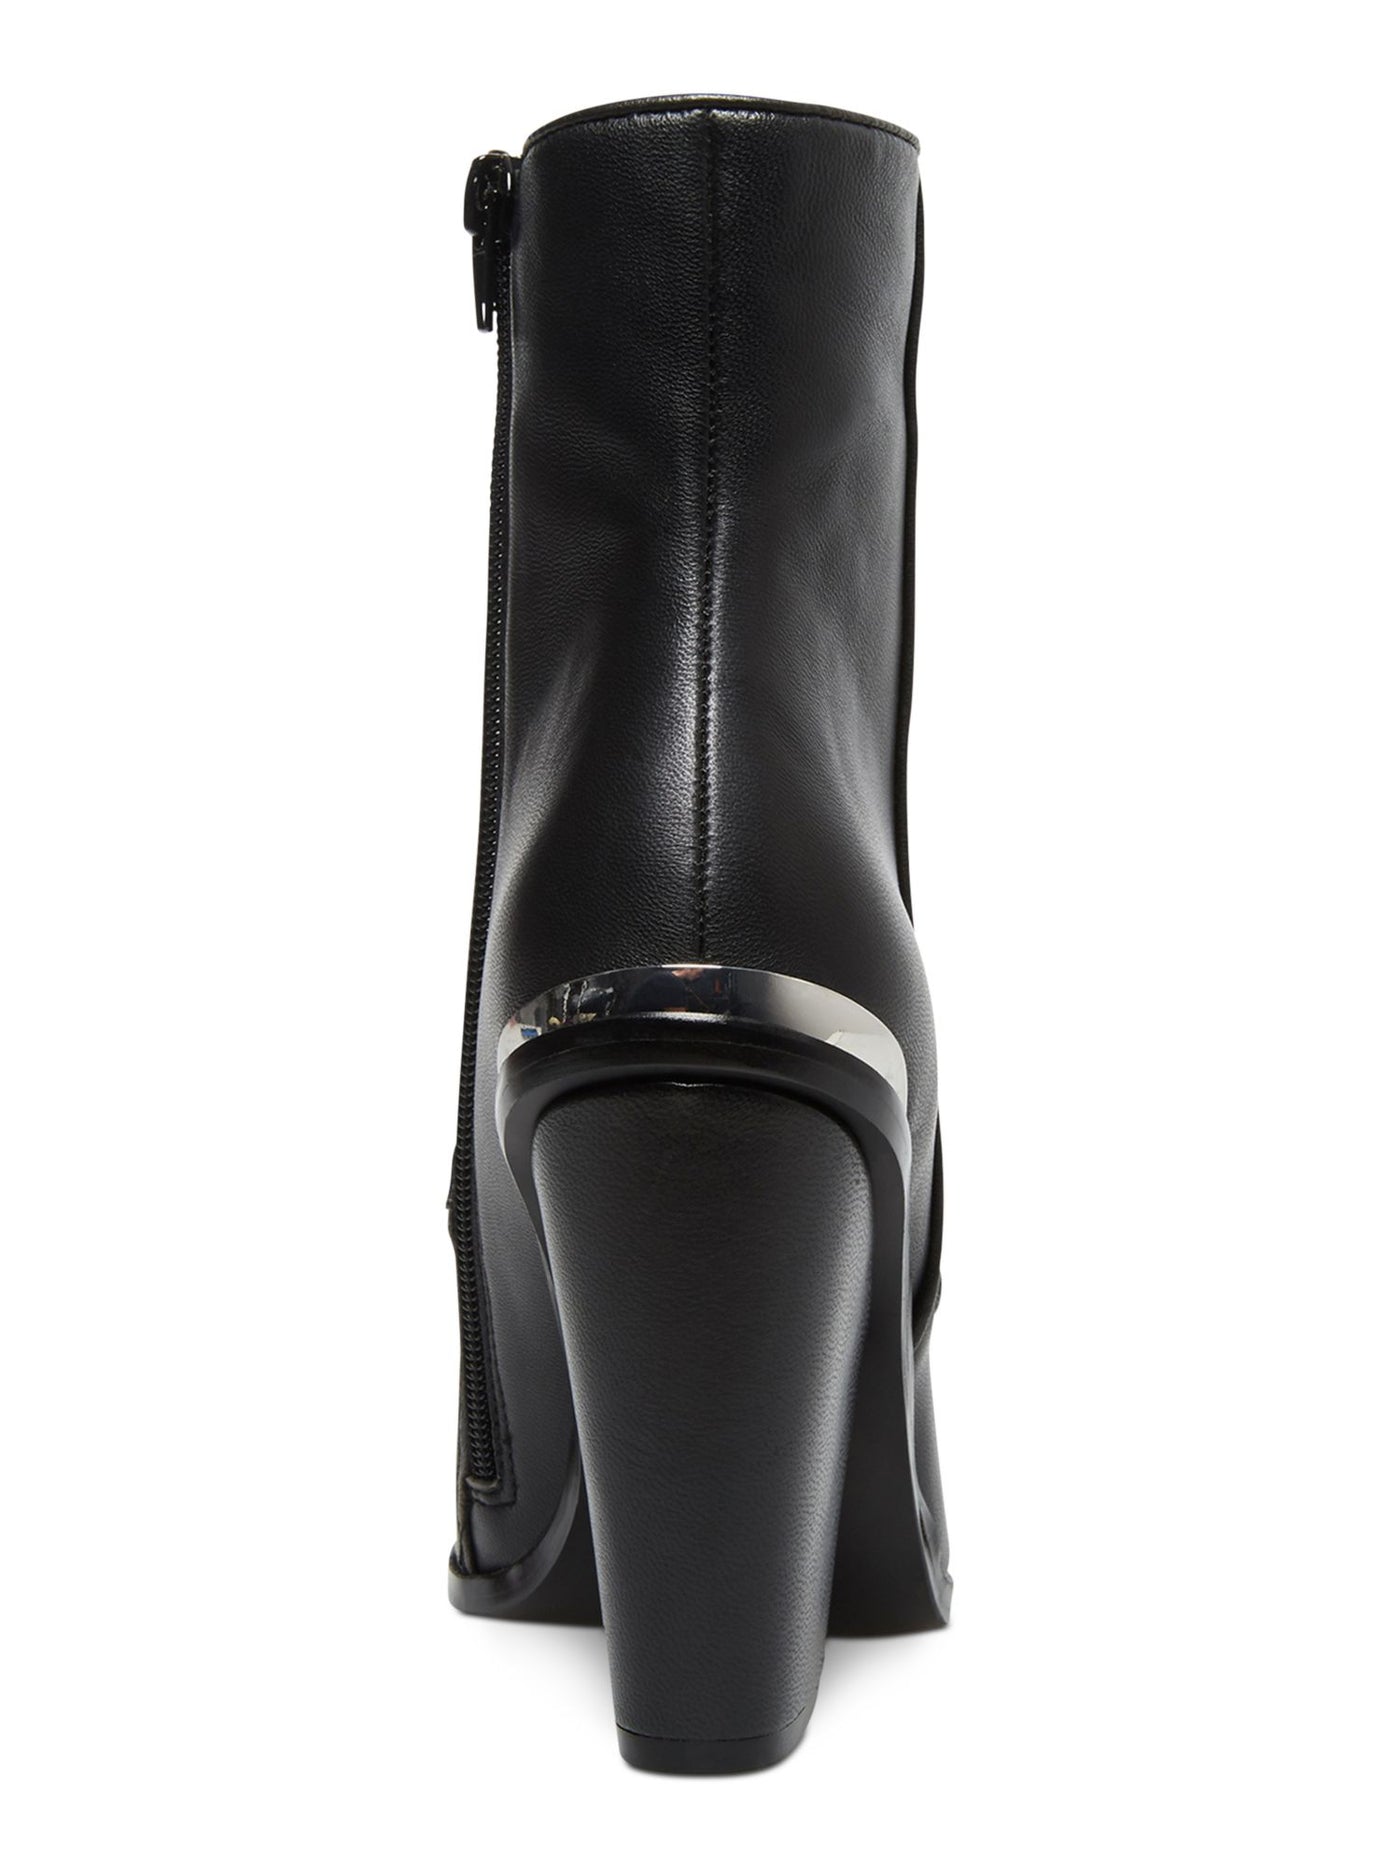 STEVE MADDEN Womens Black Padded Rarely Pointed Toe Block Heel Zip-Up Leather Western Boot 6 M